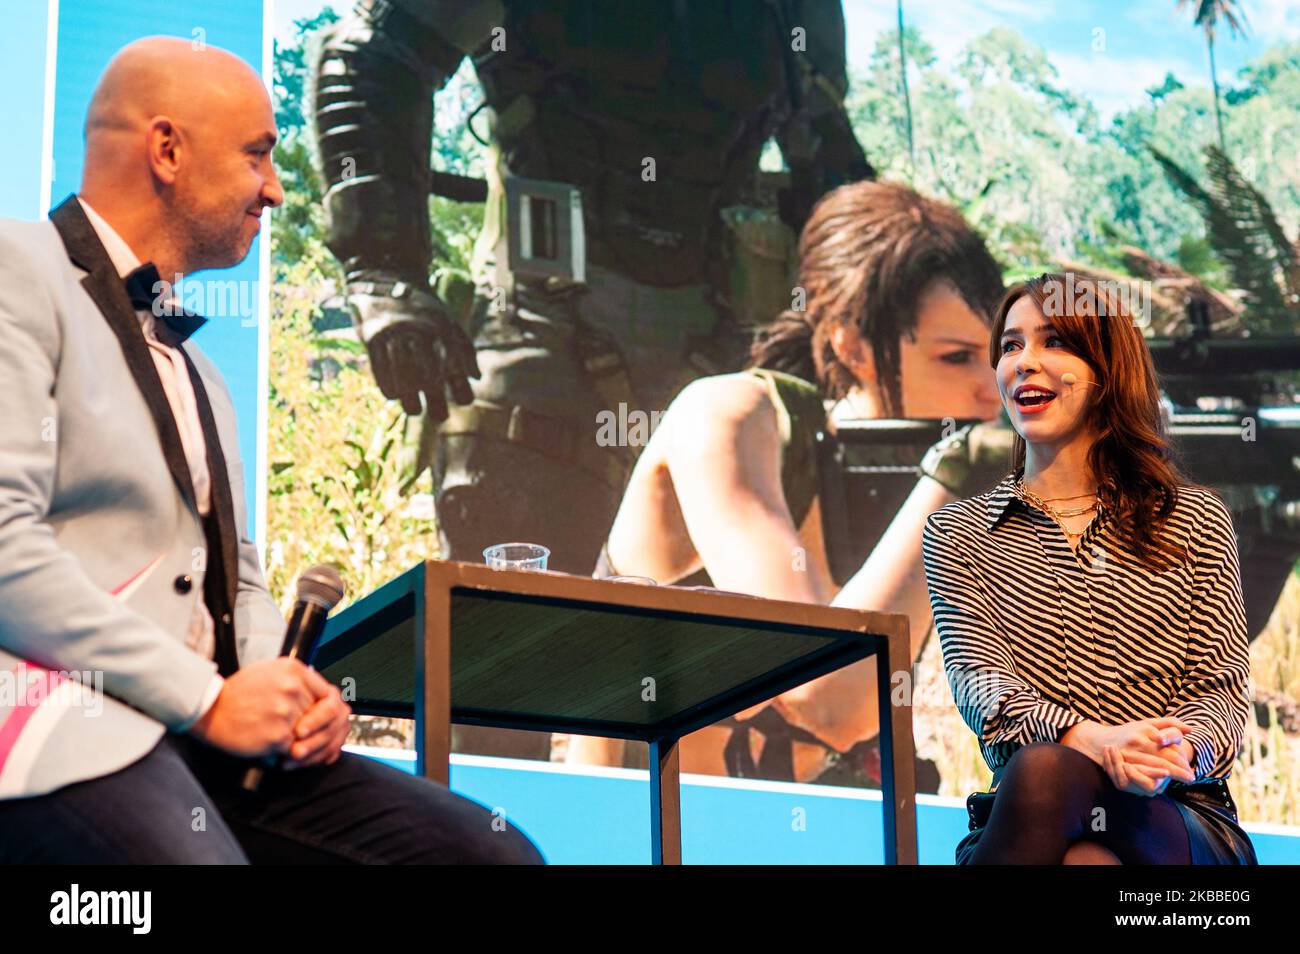 Stefanie Joosten, who was chosen as both the visual and voice model for Quiet, a central female character in the Metal Gear game Metal Gear Solid V: The Phantom Pain is giving a talk during the Bright Day Festival in Amsterdam, on November 23rd, 2019. (Photo by Romy Arroyo Fernandez/NurPhoto) Stock Photo